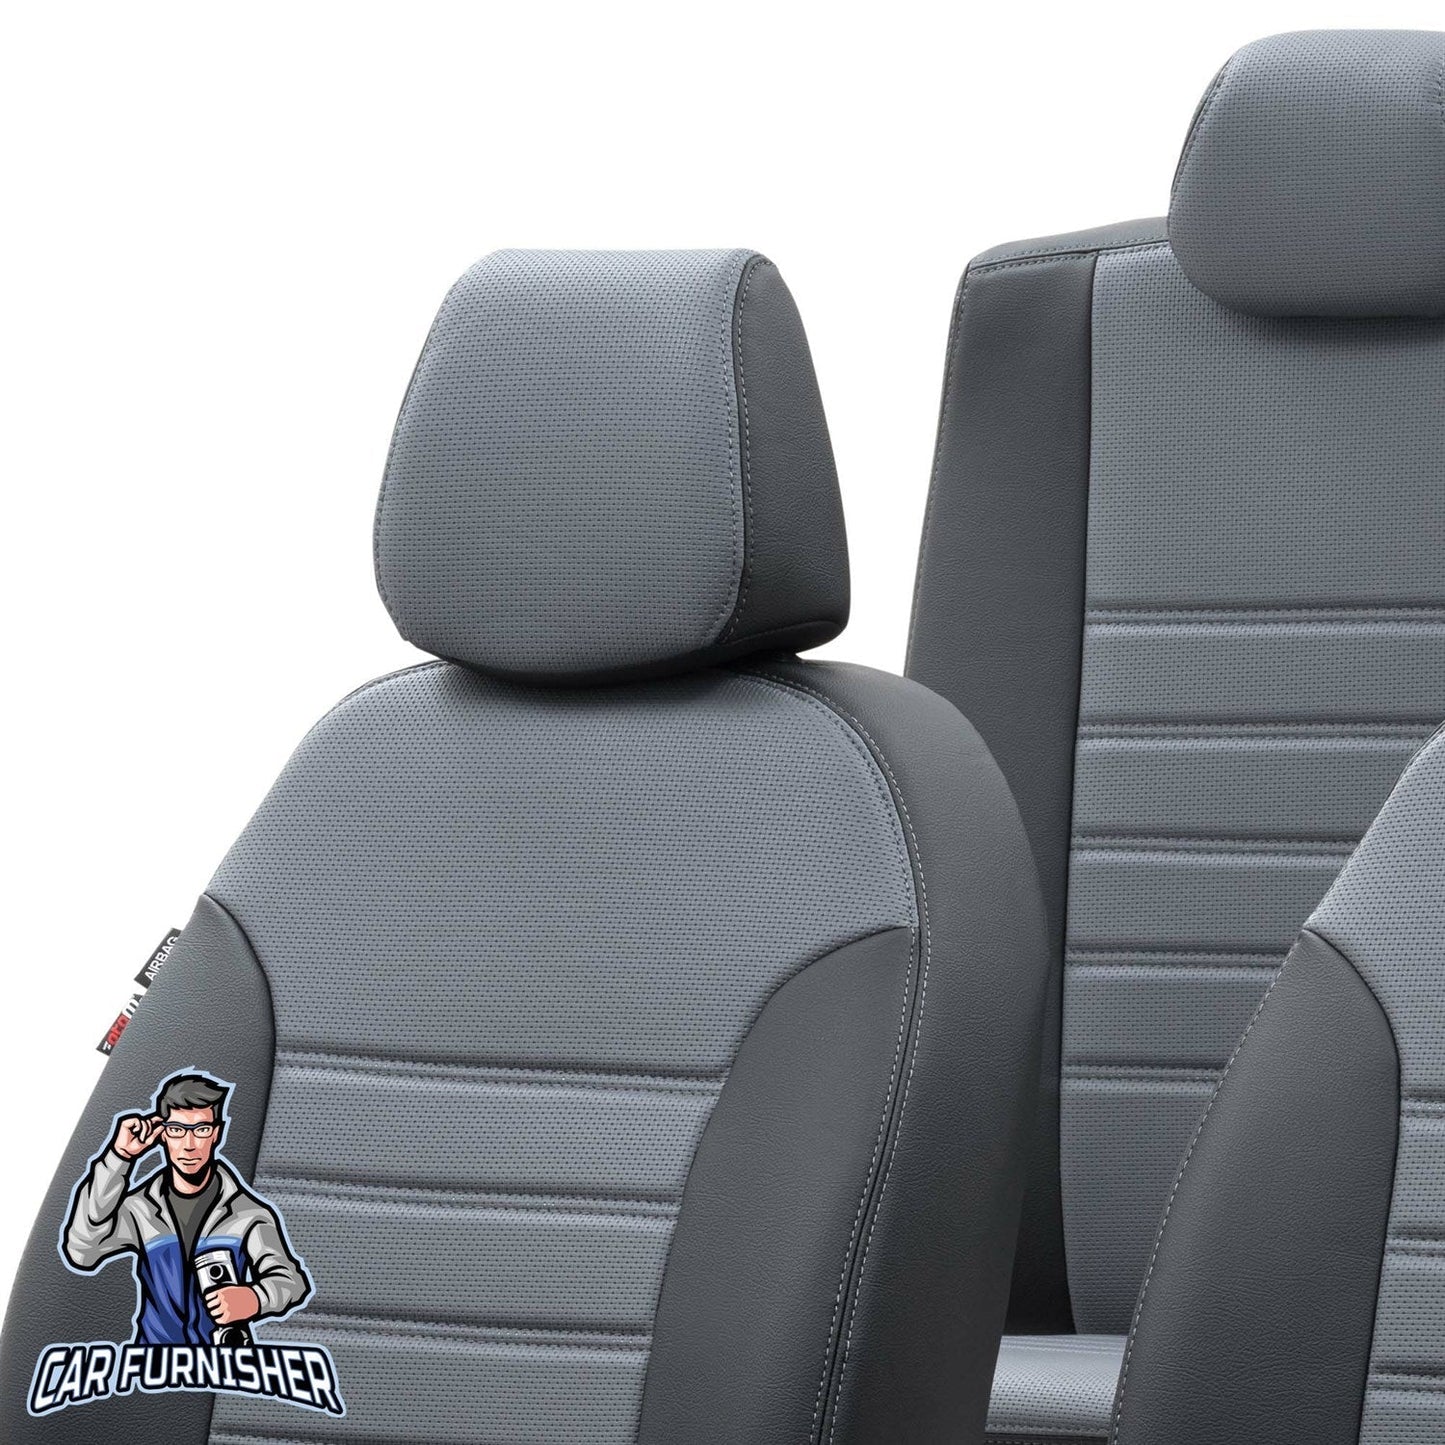 Fiat Fiorino Seat Covers New York Leather Design Smoked Black Leather